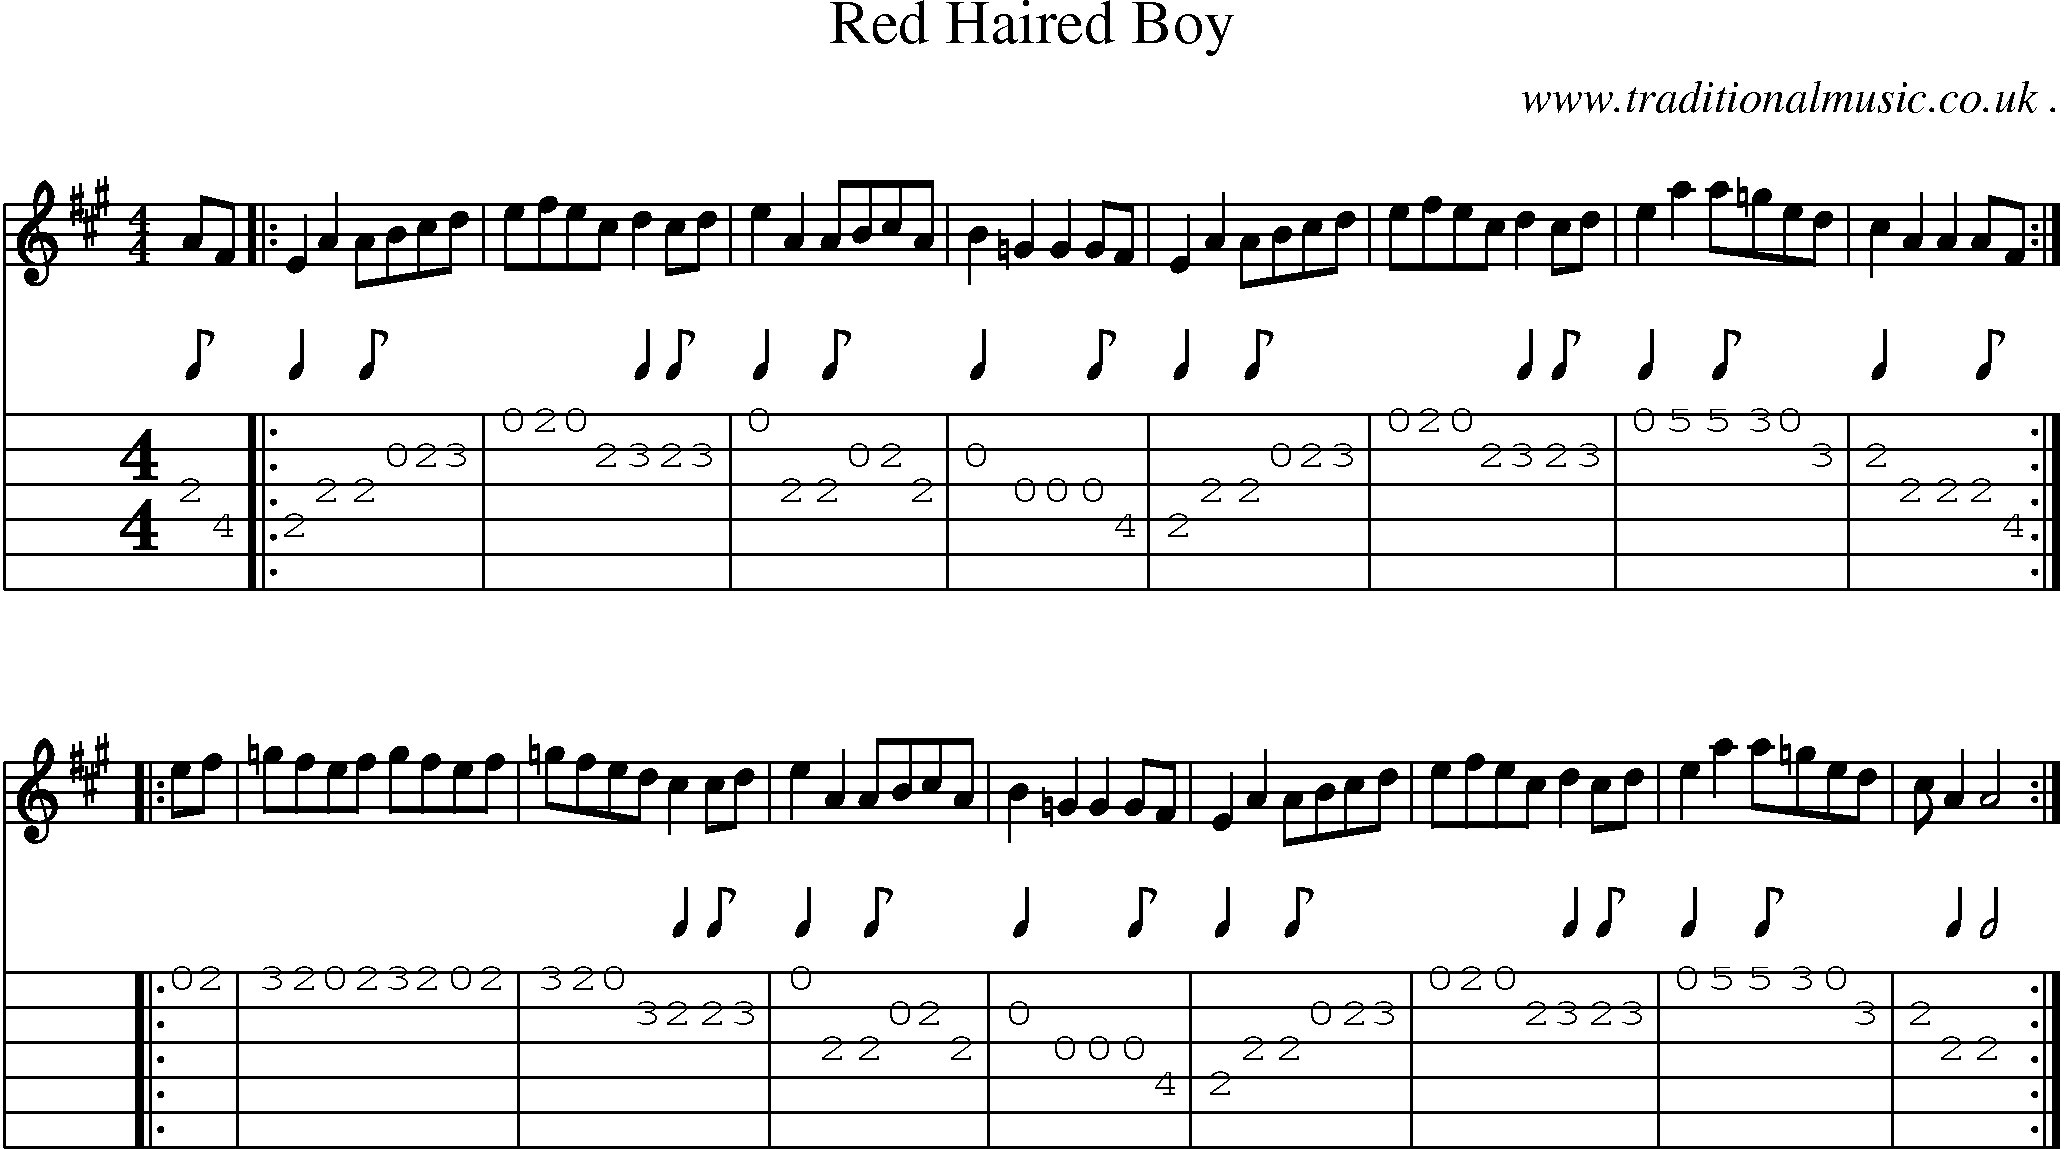 Music Score and Guitar Tabs for Red Haired Boy